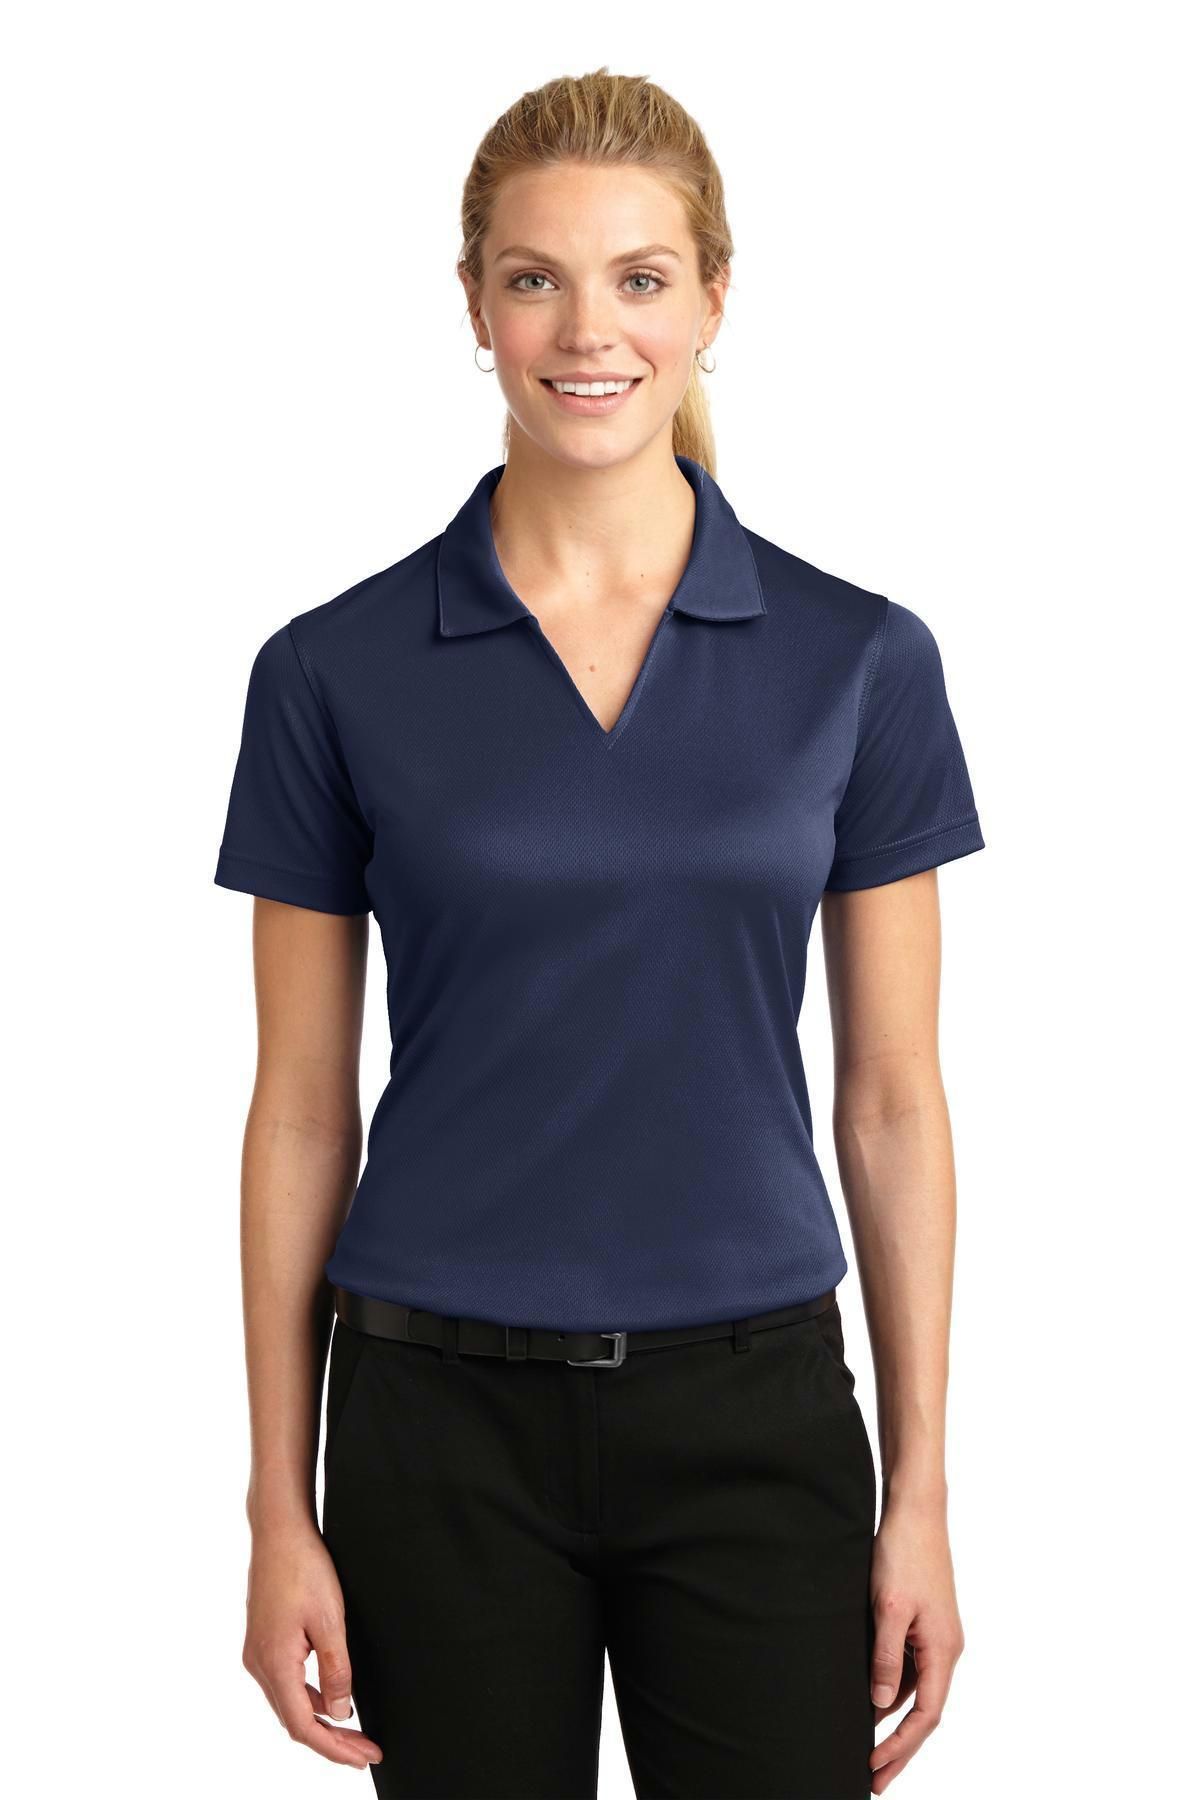 Ladies Corporate Shirts: A Comprehensive Guide to Professional Elegance